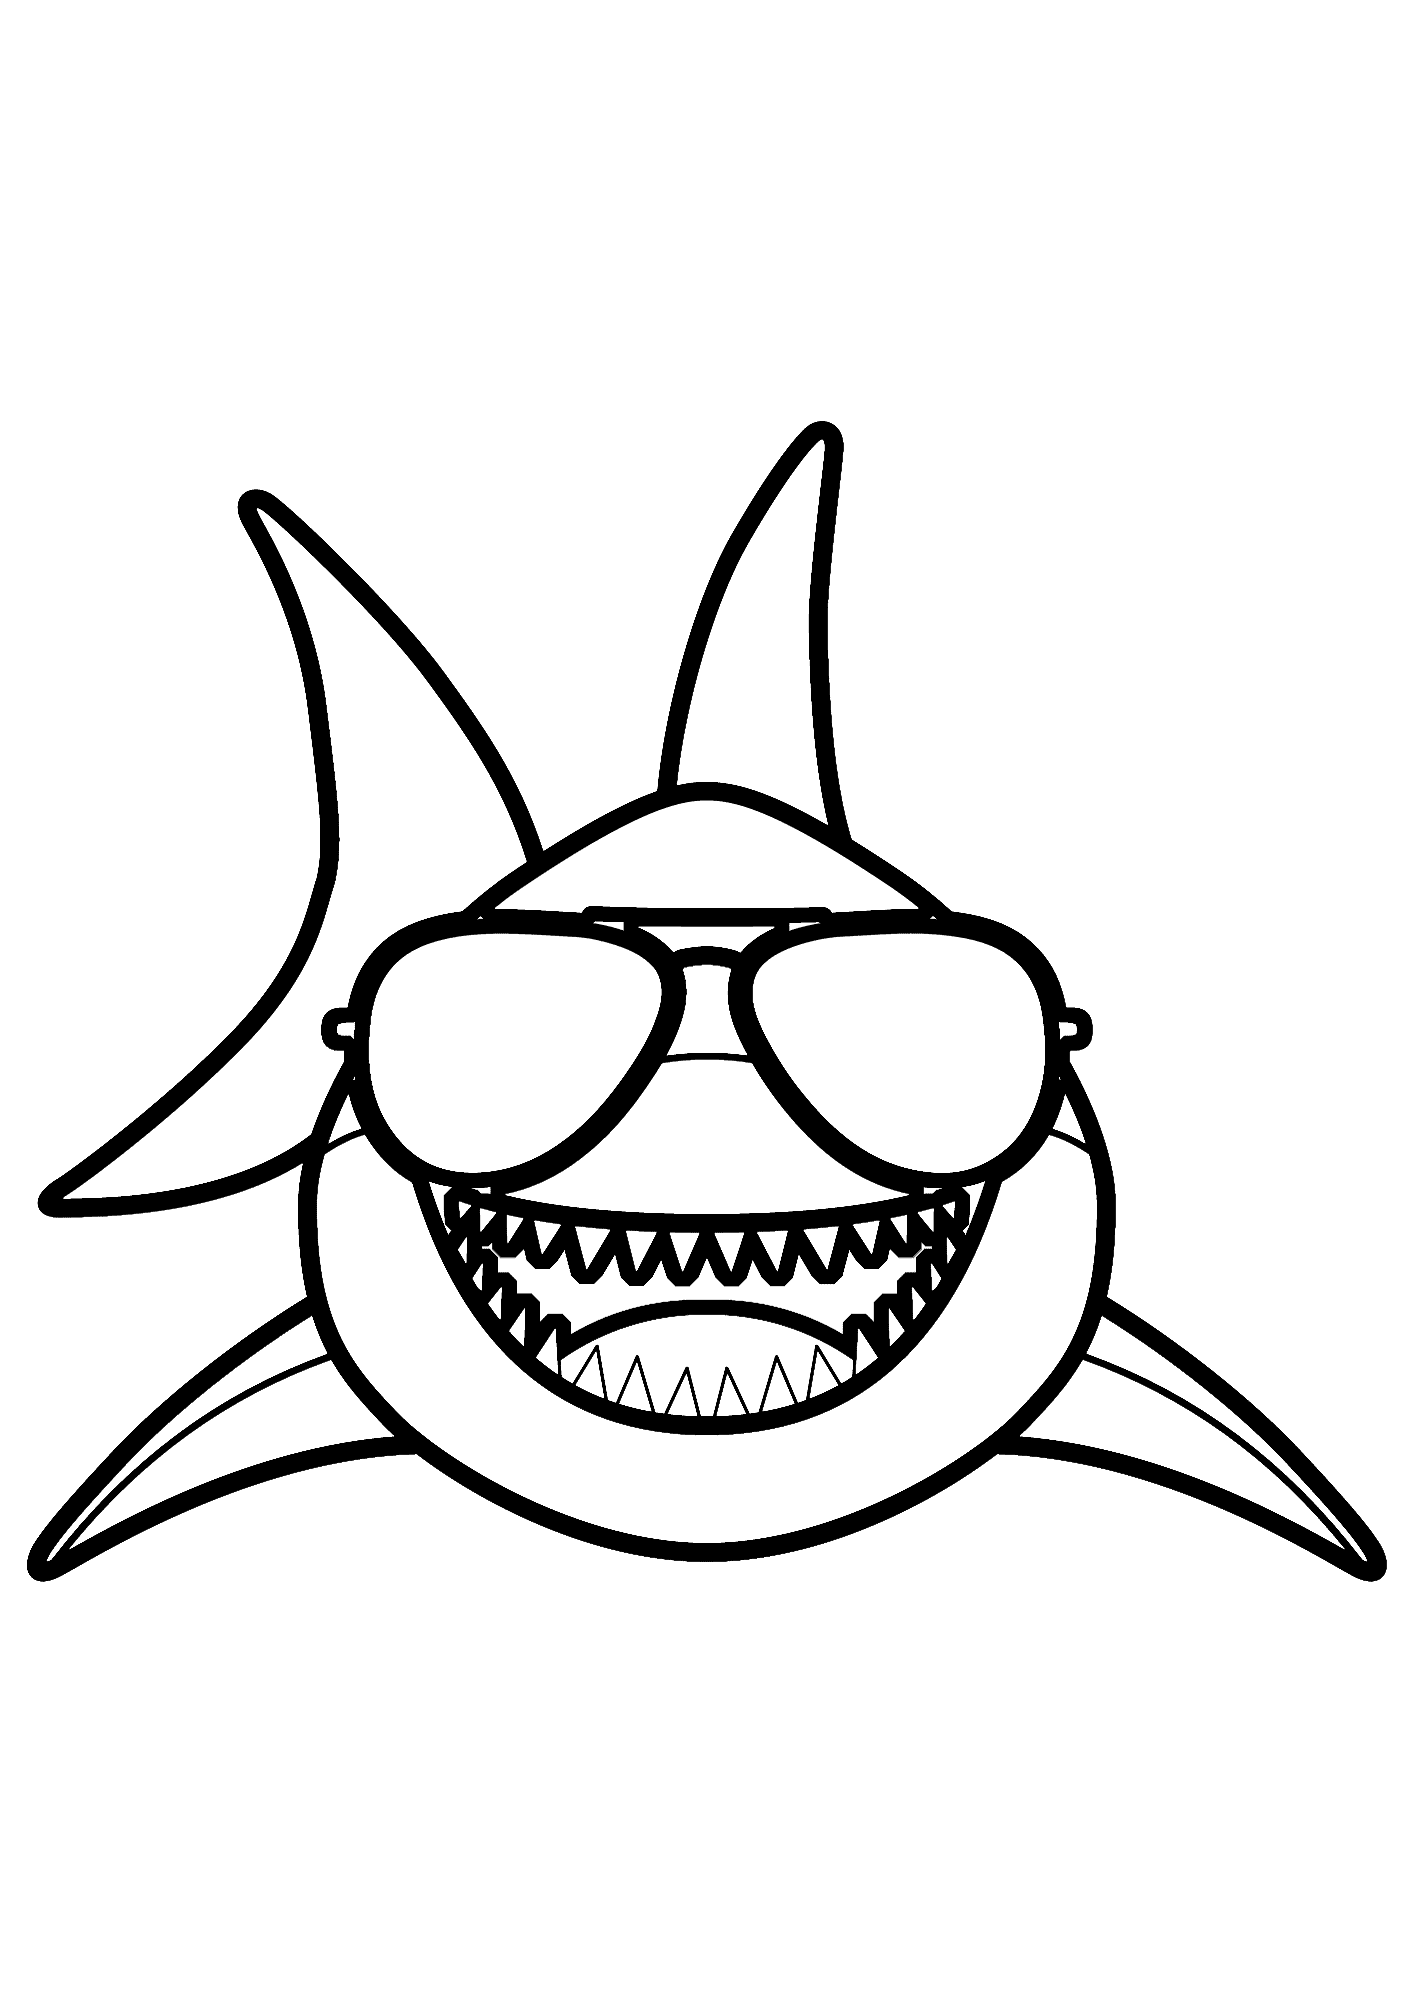 Sharks Image Drawing Coloring Pages